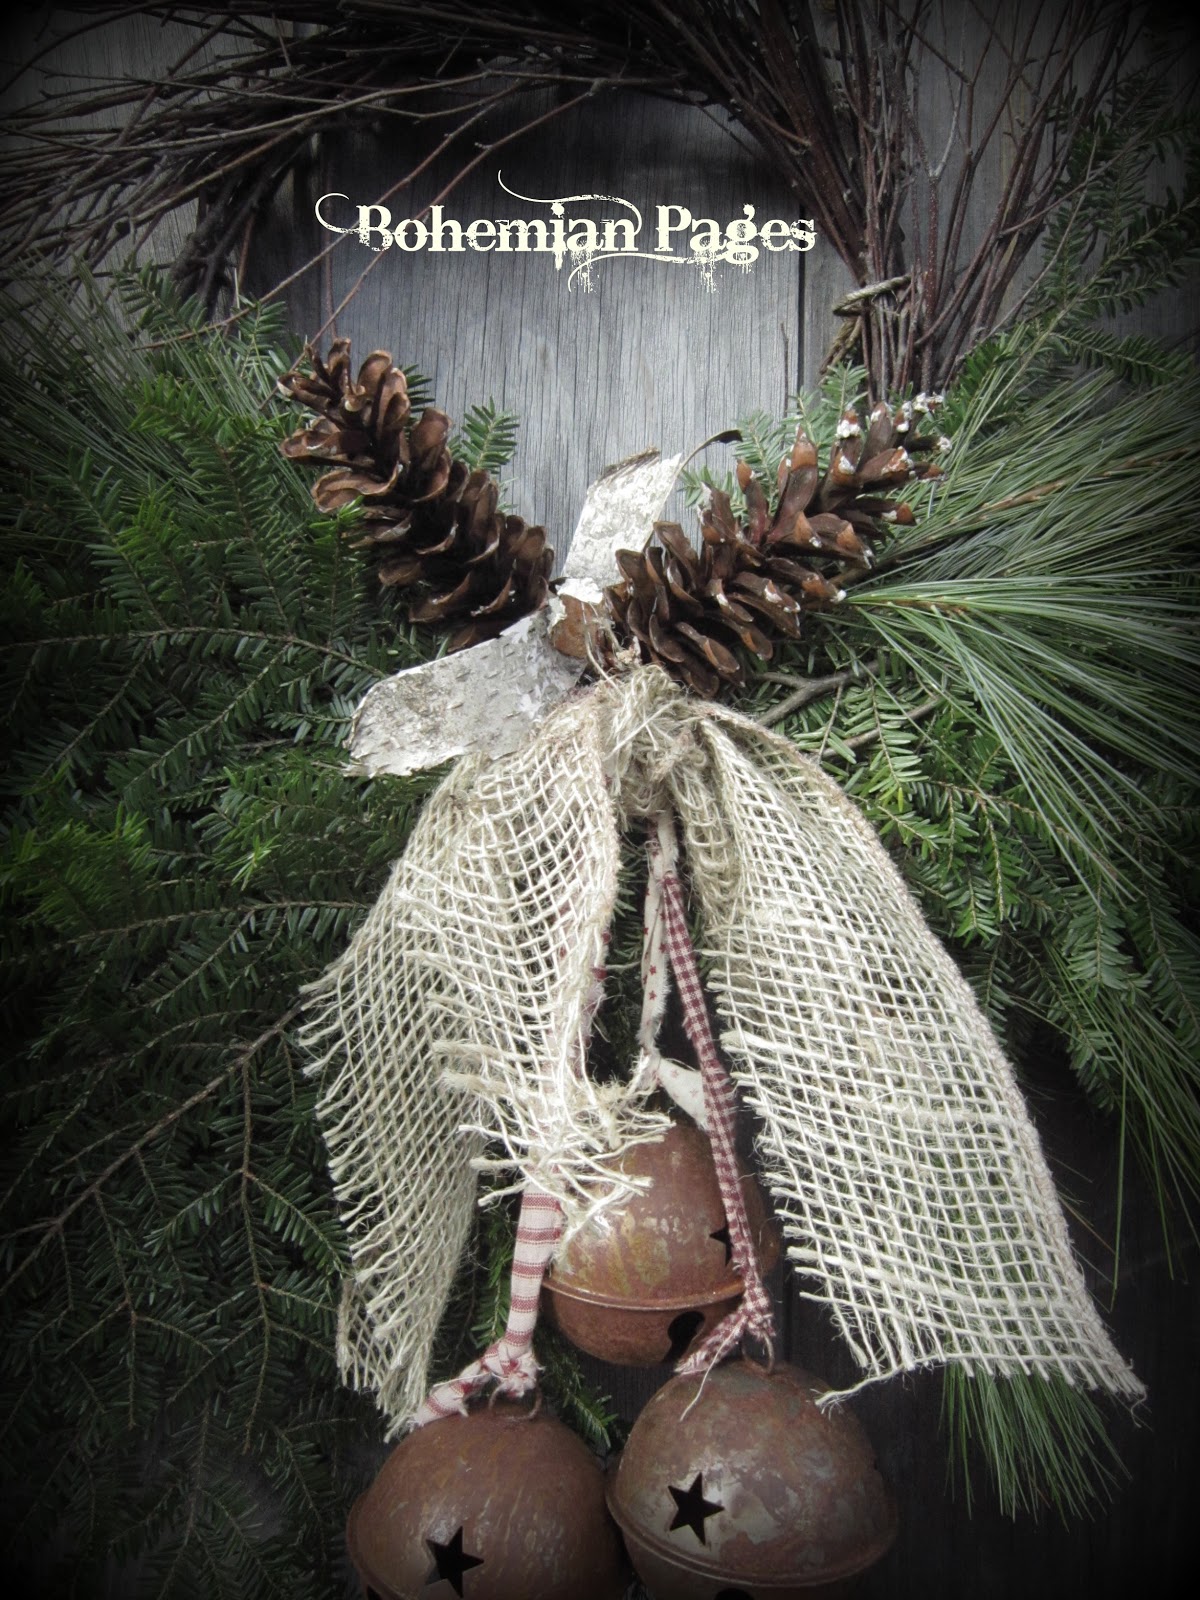 Bohemian Pages: The Making of the Wreaths.....